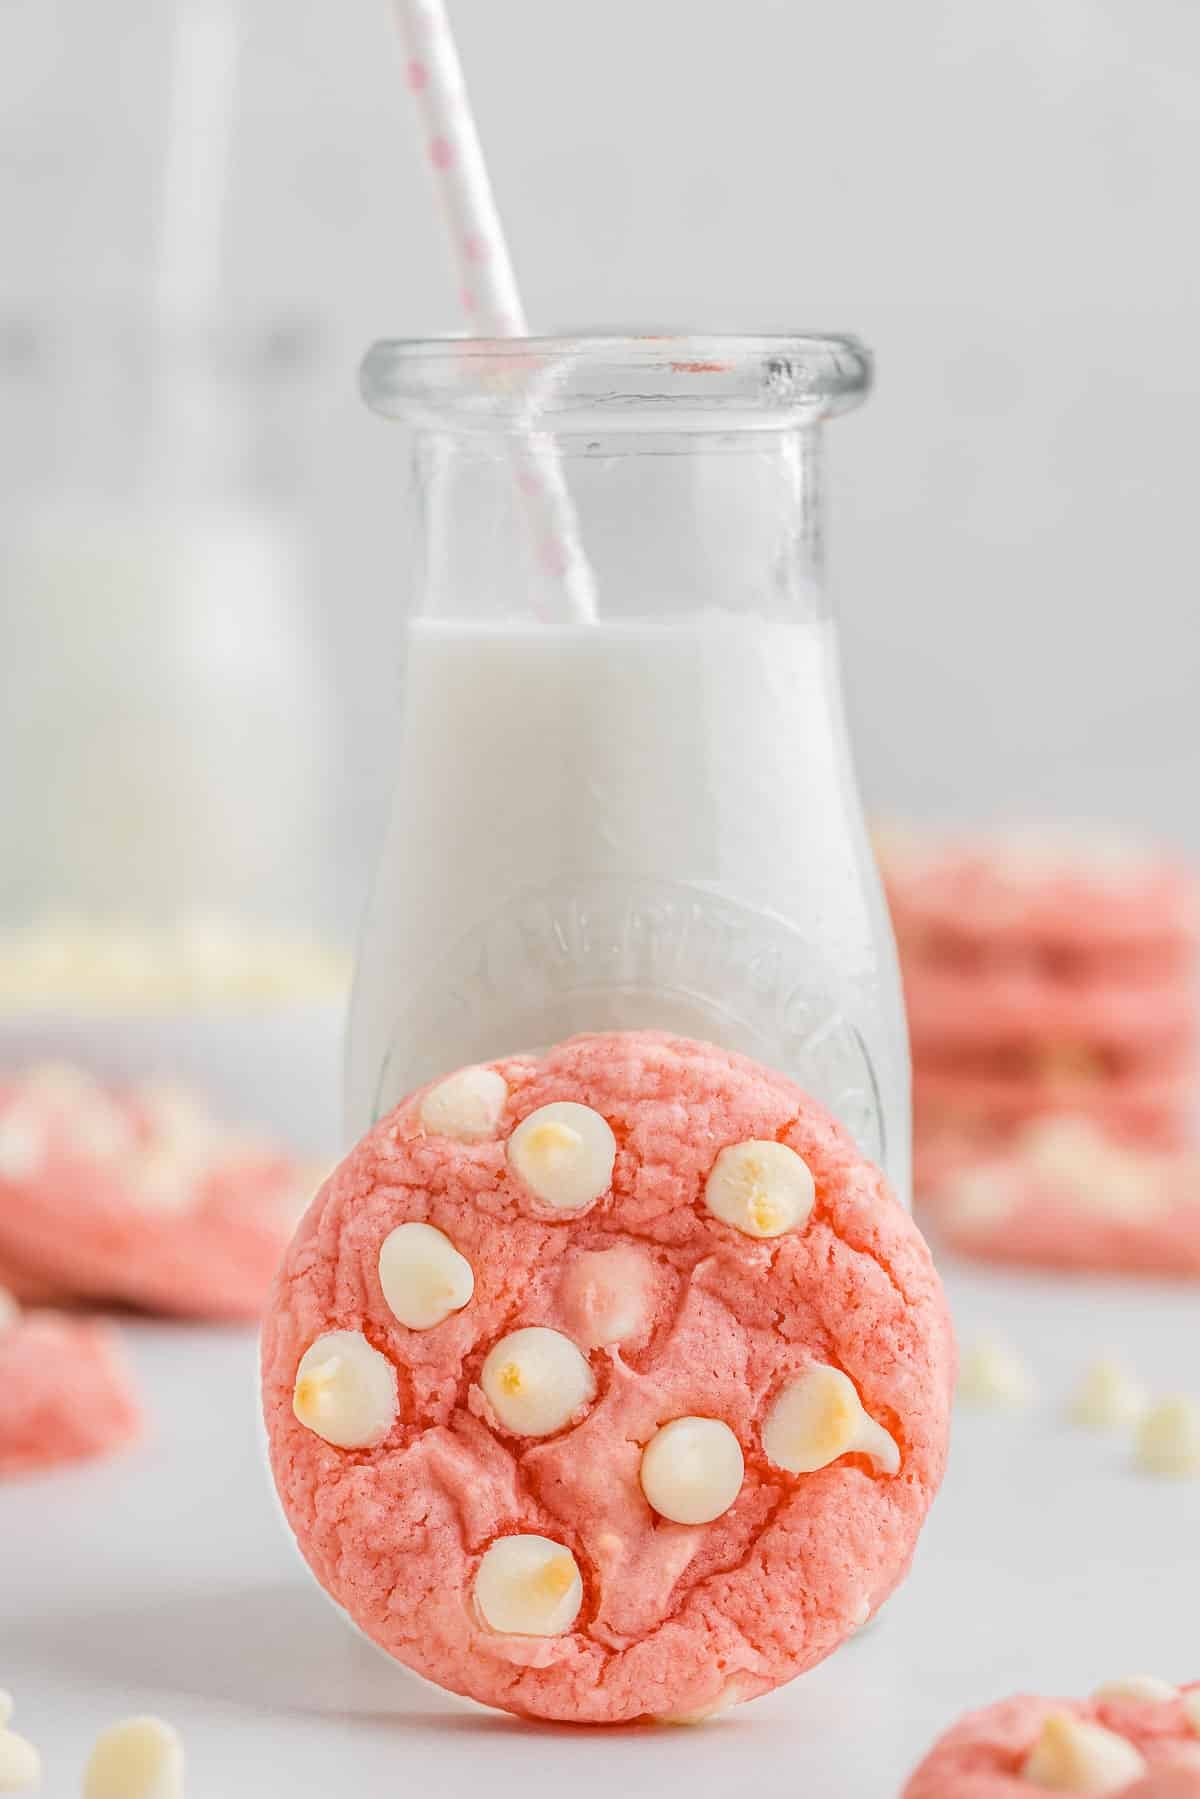 A strawberry cookie leaded up next to a glass of milk.